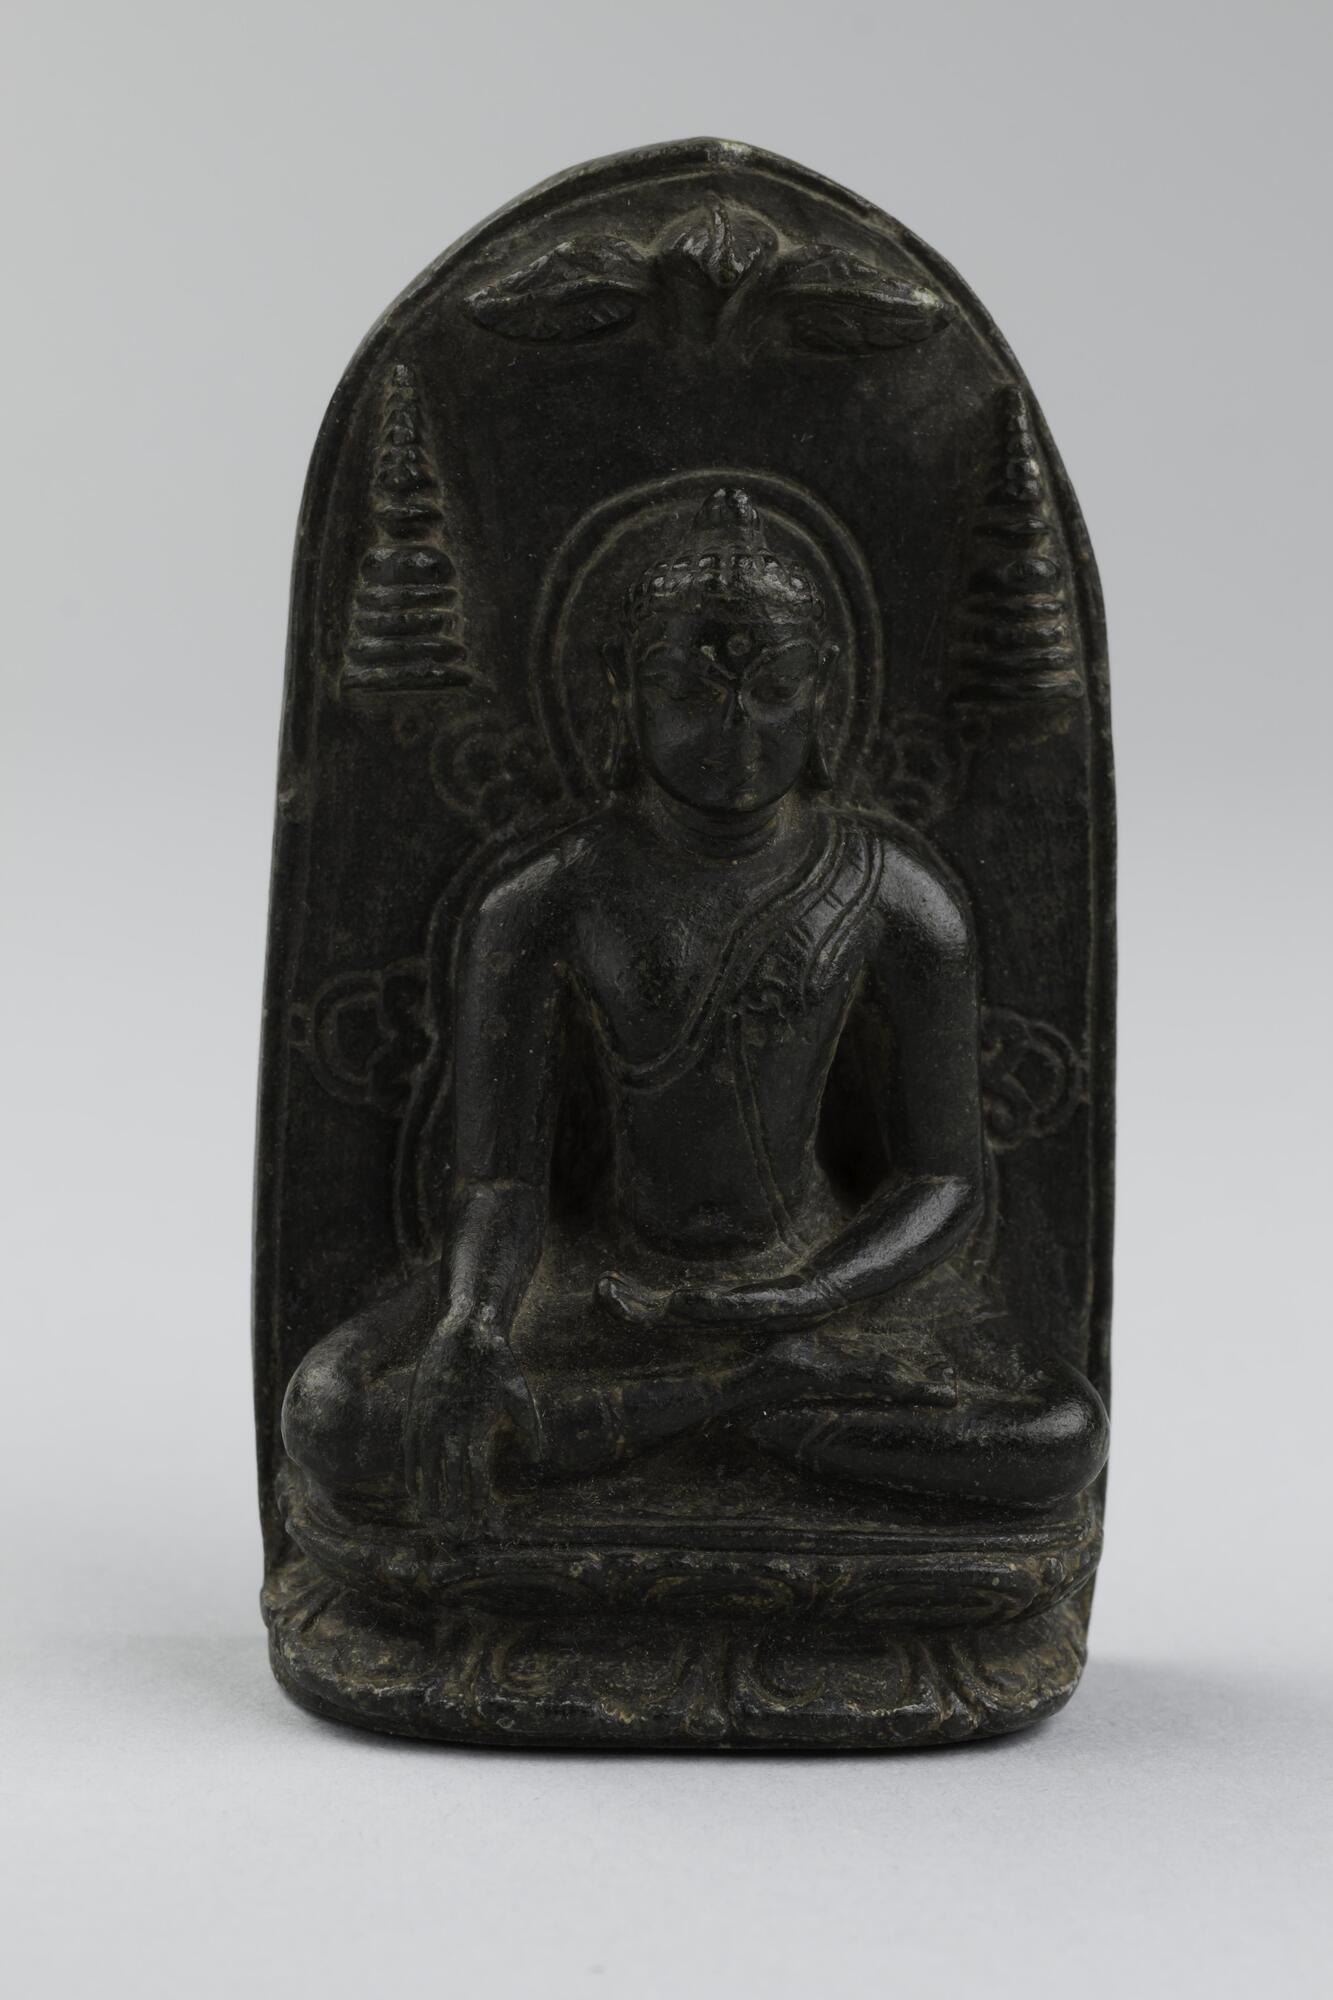 The Buddha in bhumisparsa mudra (the gesture of touching the earth with his right hand, palm inward), signaling his victory over Mara. He is shown under three leaves, indicating the bodhi tree under which he sat while meditating before reaching an awakening. He is shown flanked by two stupas, or reliquary monuments, symbolizing his attainment of nirvana.<br />